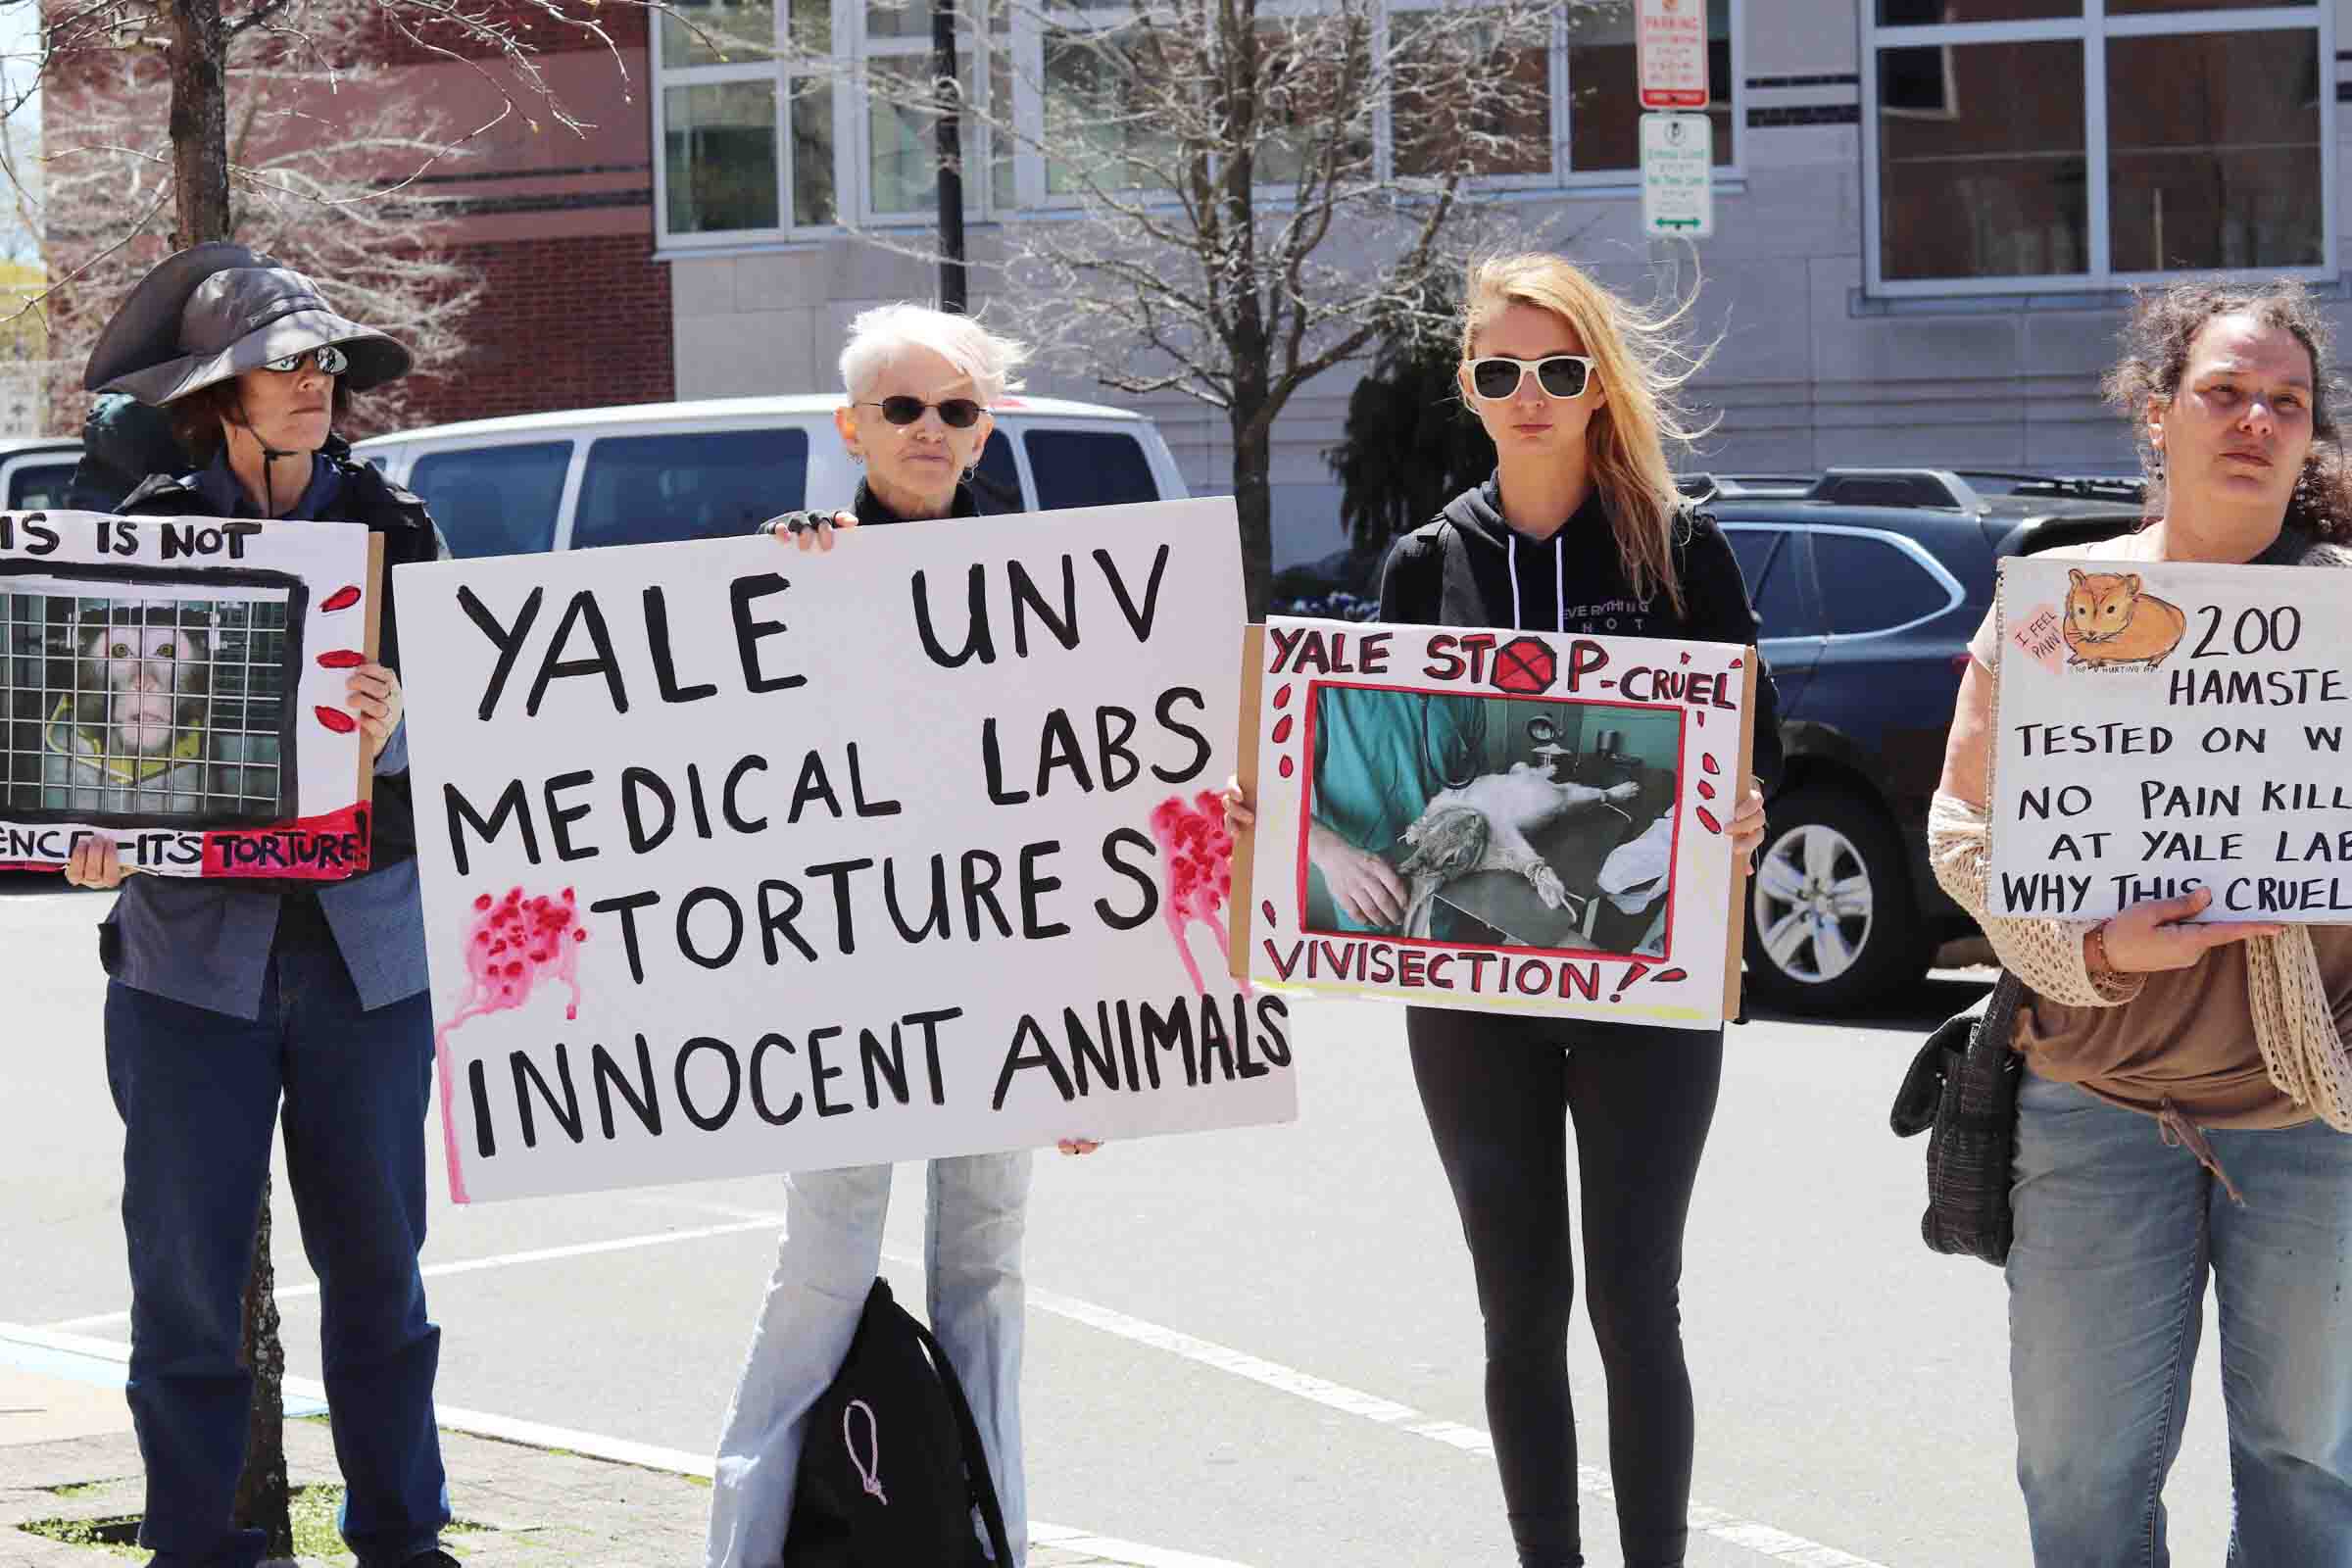 Animal rights activists target med school research - Yale Daily News